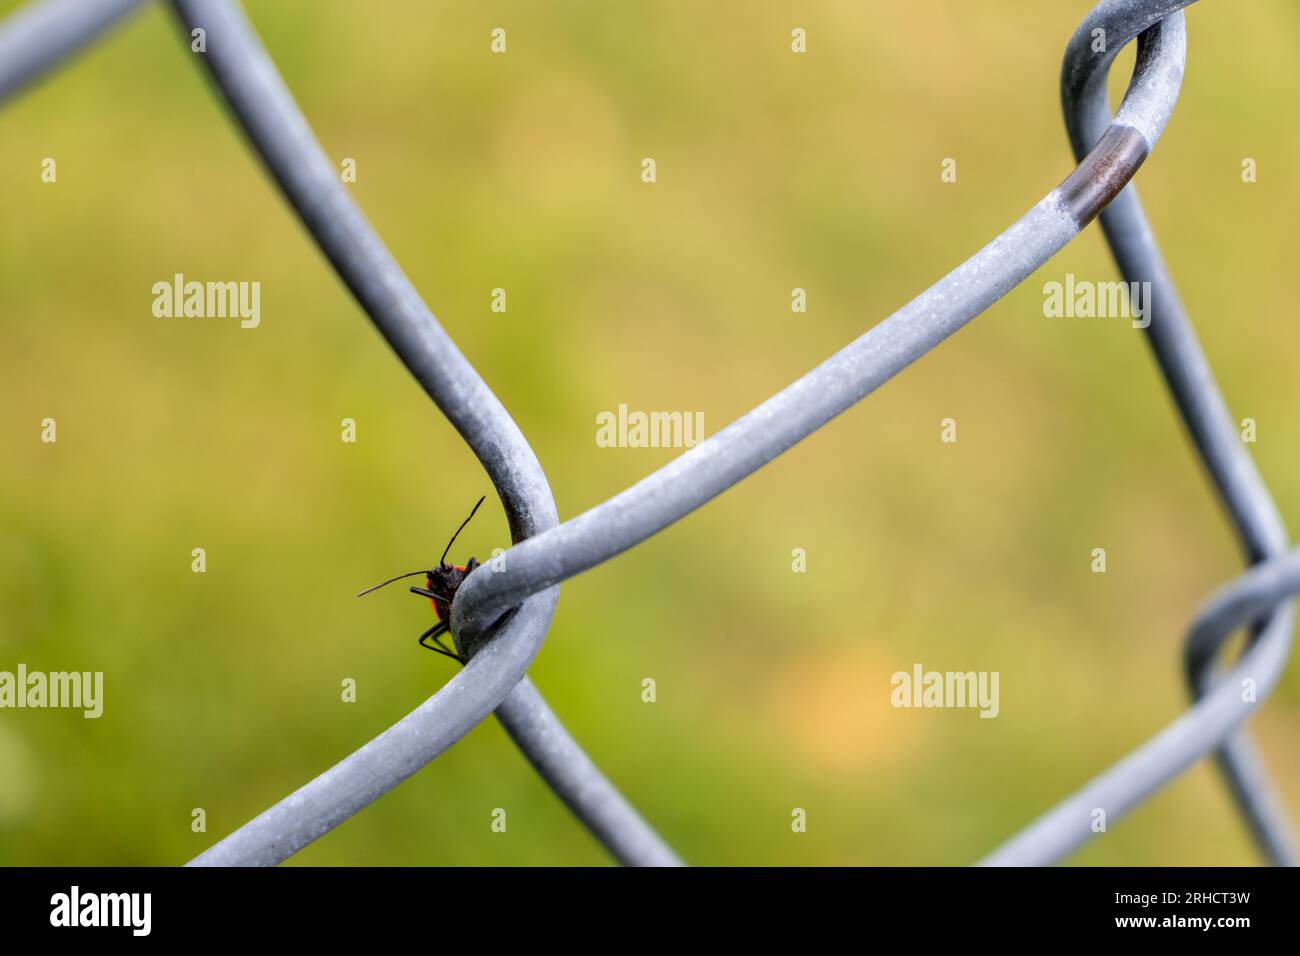 Red and black insect on chain link fence - close up shot - insect has red body and black legs and antennae - fence is gray and blurred in background - Stock Photo